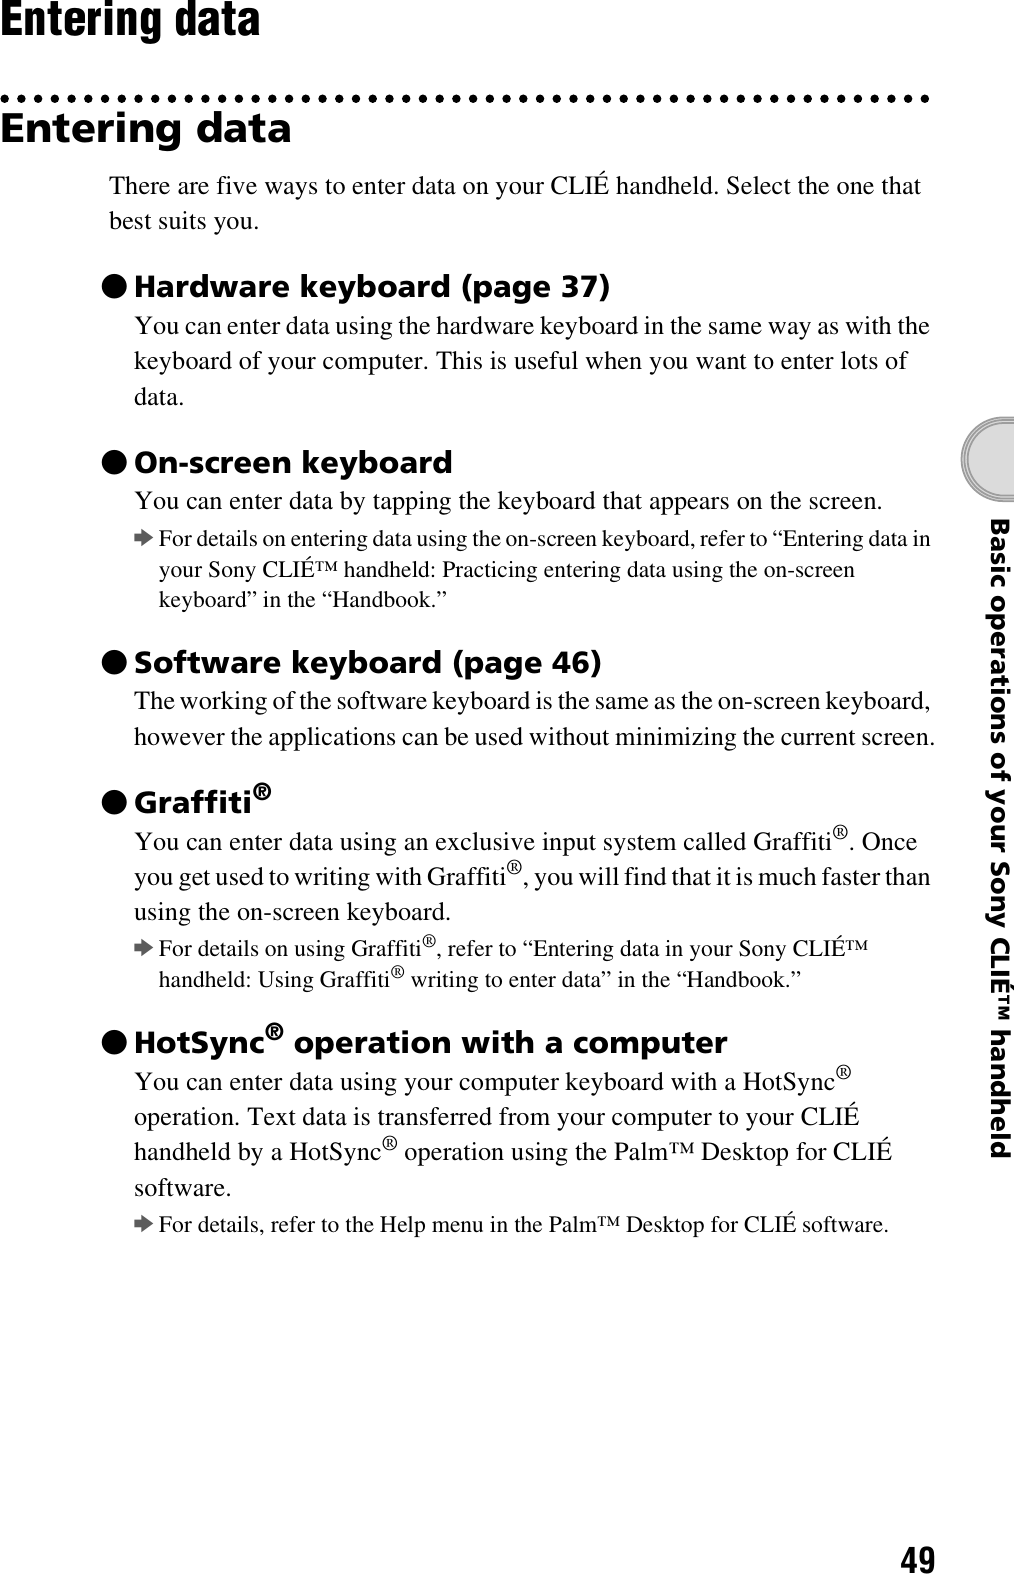 49Basic operations of your Sony CLIÉ™ handheldEntering dataEntering dataThere are five ways to enter data on your CLIÉ handheld. Select the one that best suits you.zHardware keyboard (page 37)You can enter data using the hardware keyboard in the same way as with the keyboard of your computer. This is useful when you want to enter lots of data.zOn-screen keyboardYou can enter data by tapping the keyboard that appears on the screen.bFor details on entering data using the on-screen keyboard, refer to “Entering data in your Sony CLIÉ™ handheld: Practicing entering data using the on-screen keyboard” in the “Handbook.”zSoftware keyboard (page 46)The working of the software keyboard is the same as the on-screen keyboard, however the applications can be used without minimizing the current screen.zGraffiti®You can enter data using an exclusive input system called Graffiti®. Once you get used to writing with Graffiti®, you will find that it is much faster than using the on-screen keyboard.bFor details on using Graffiti®, refer to “Entering data in your Sony CLIÉ™ handheld: Using Graffiti® writing to enter data” in the “Handbook.”zHotSync® operation with a computerYou can enter data using your computer keyboard with a HotSync® operation. Text data is transferred from your computer to your CLIÉ handheld by a HotSync® operation using the Palm™ Desktop for CLIÉ software. bFor details, refer to the Help menu in the Palm™ Desktop for CLIÉ software.